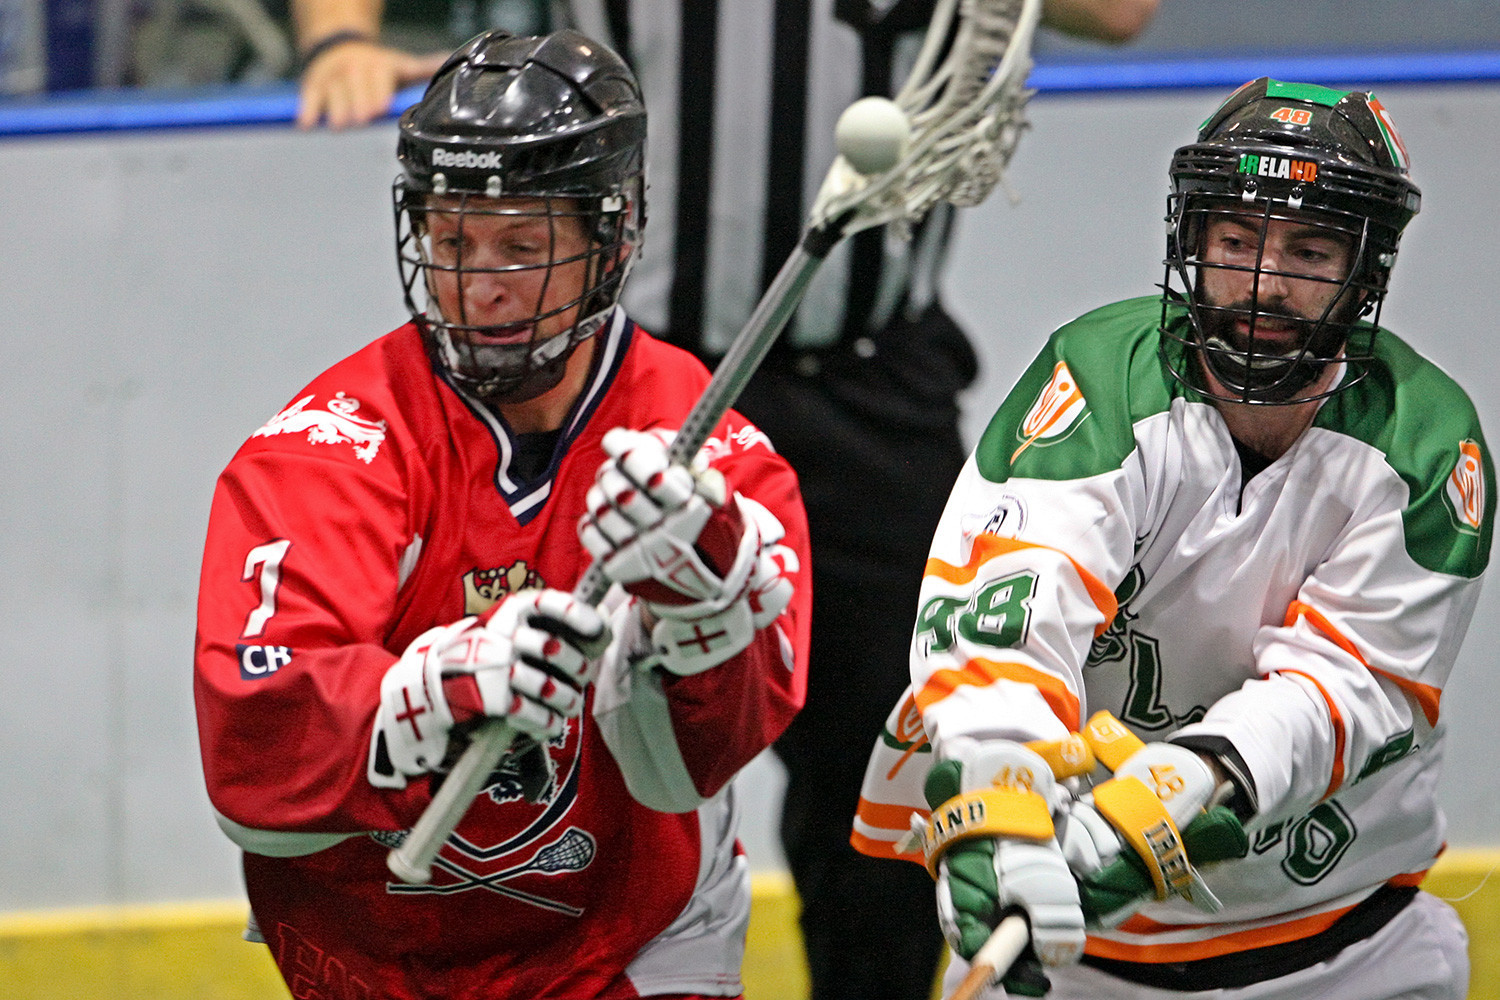 Onondaga Nation played host to the 2015 FIL World Indoor Lacrosse Championship ©FIL